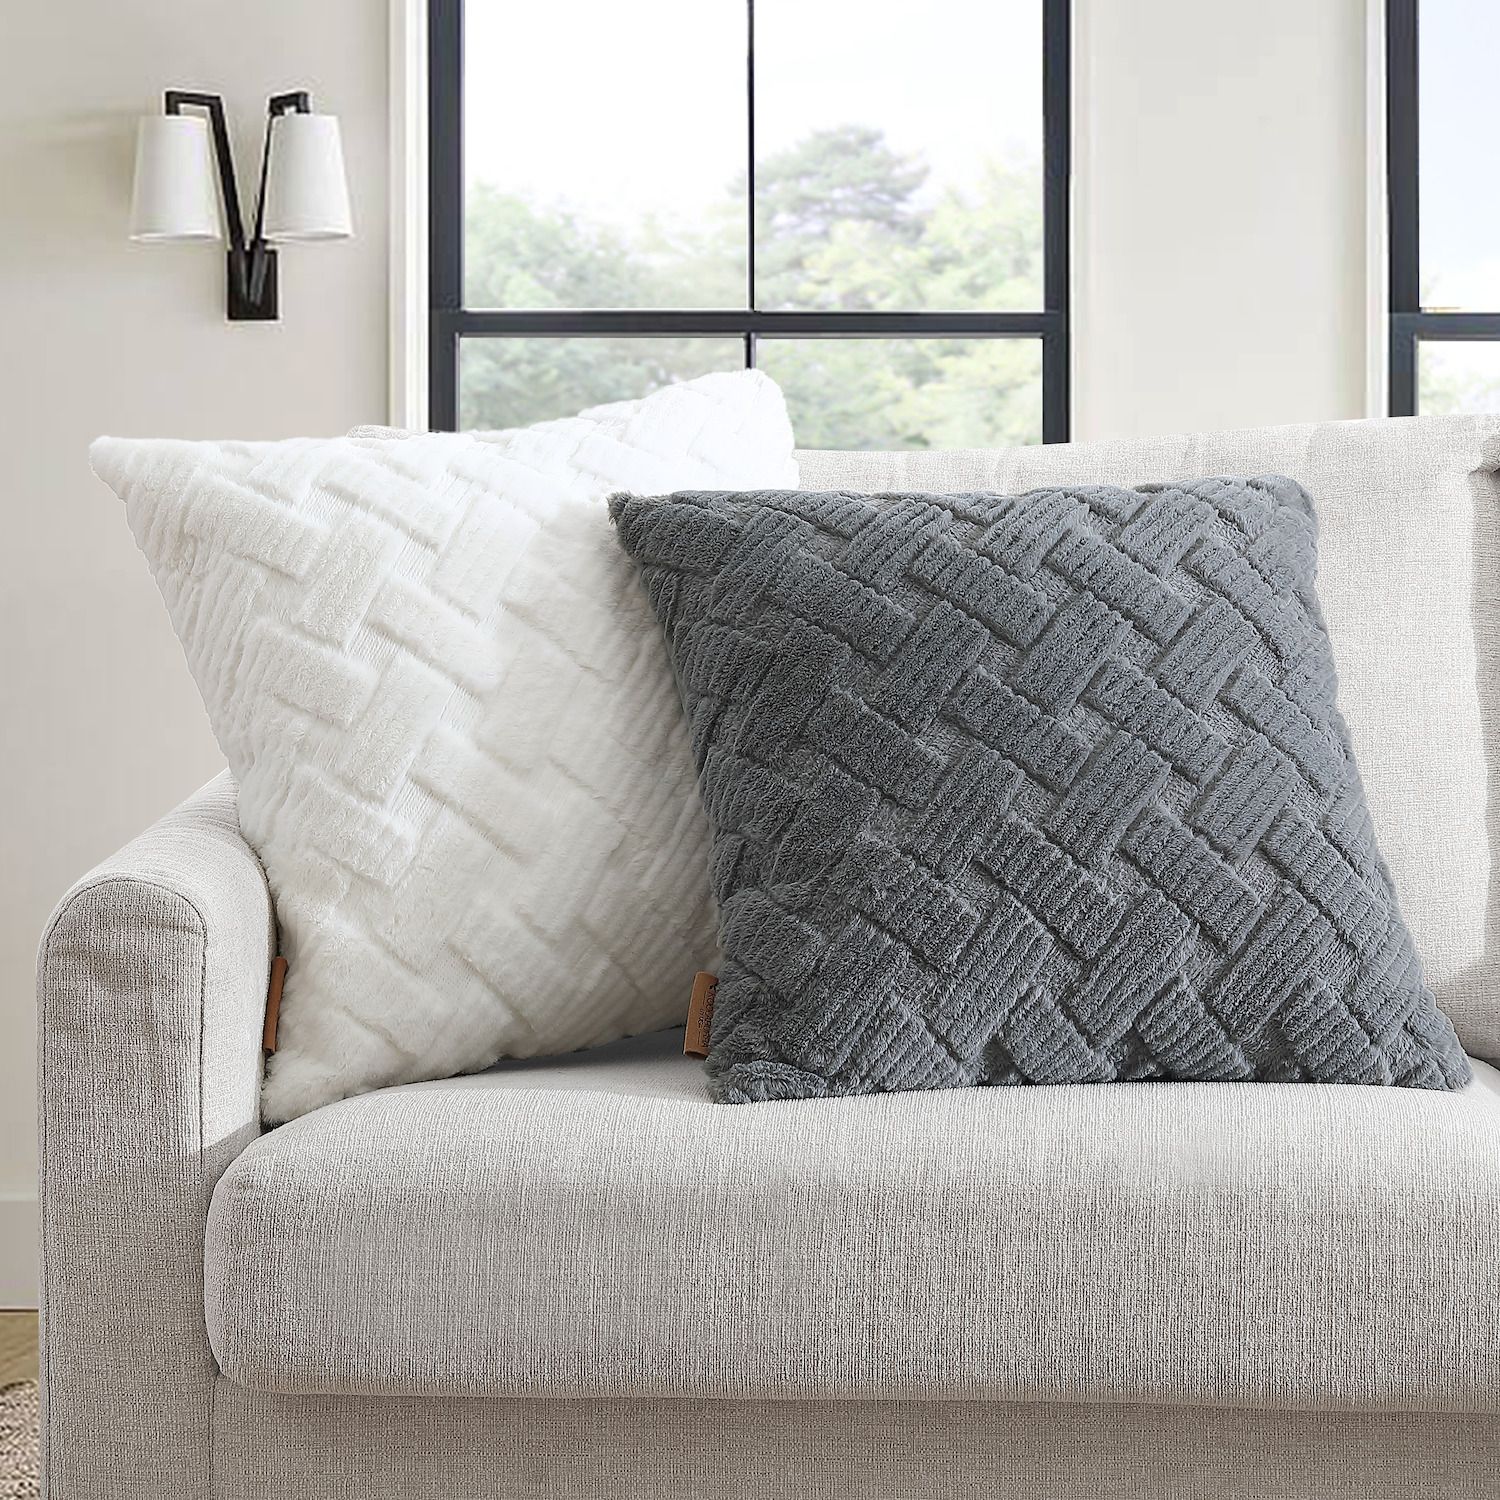 Throw pillows offer a variety of textures and colors, making them easy to pair with your other home decorations.